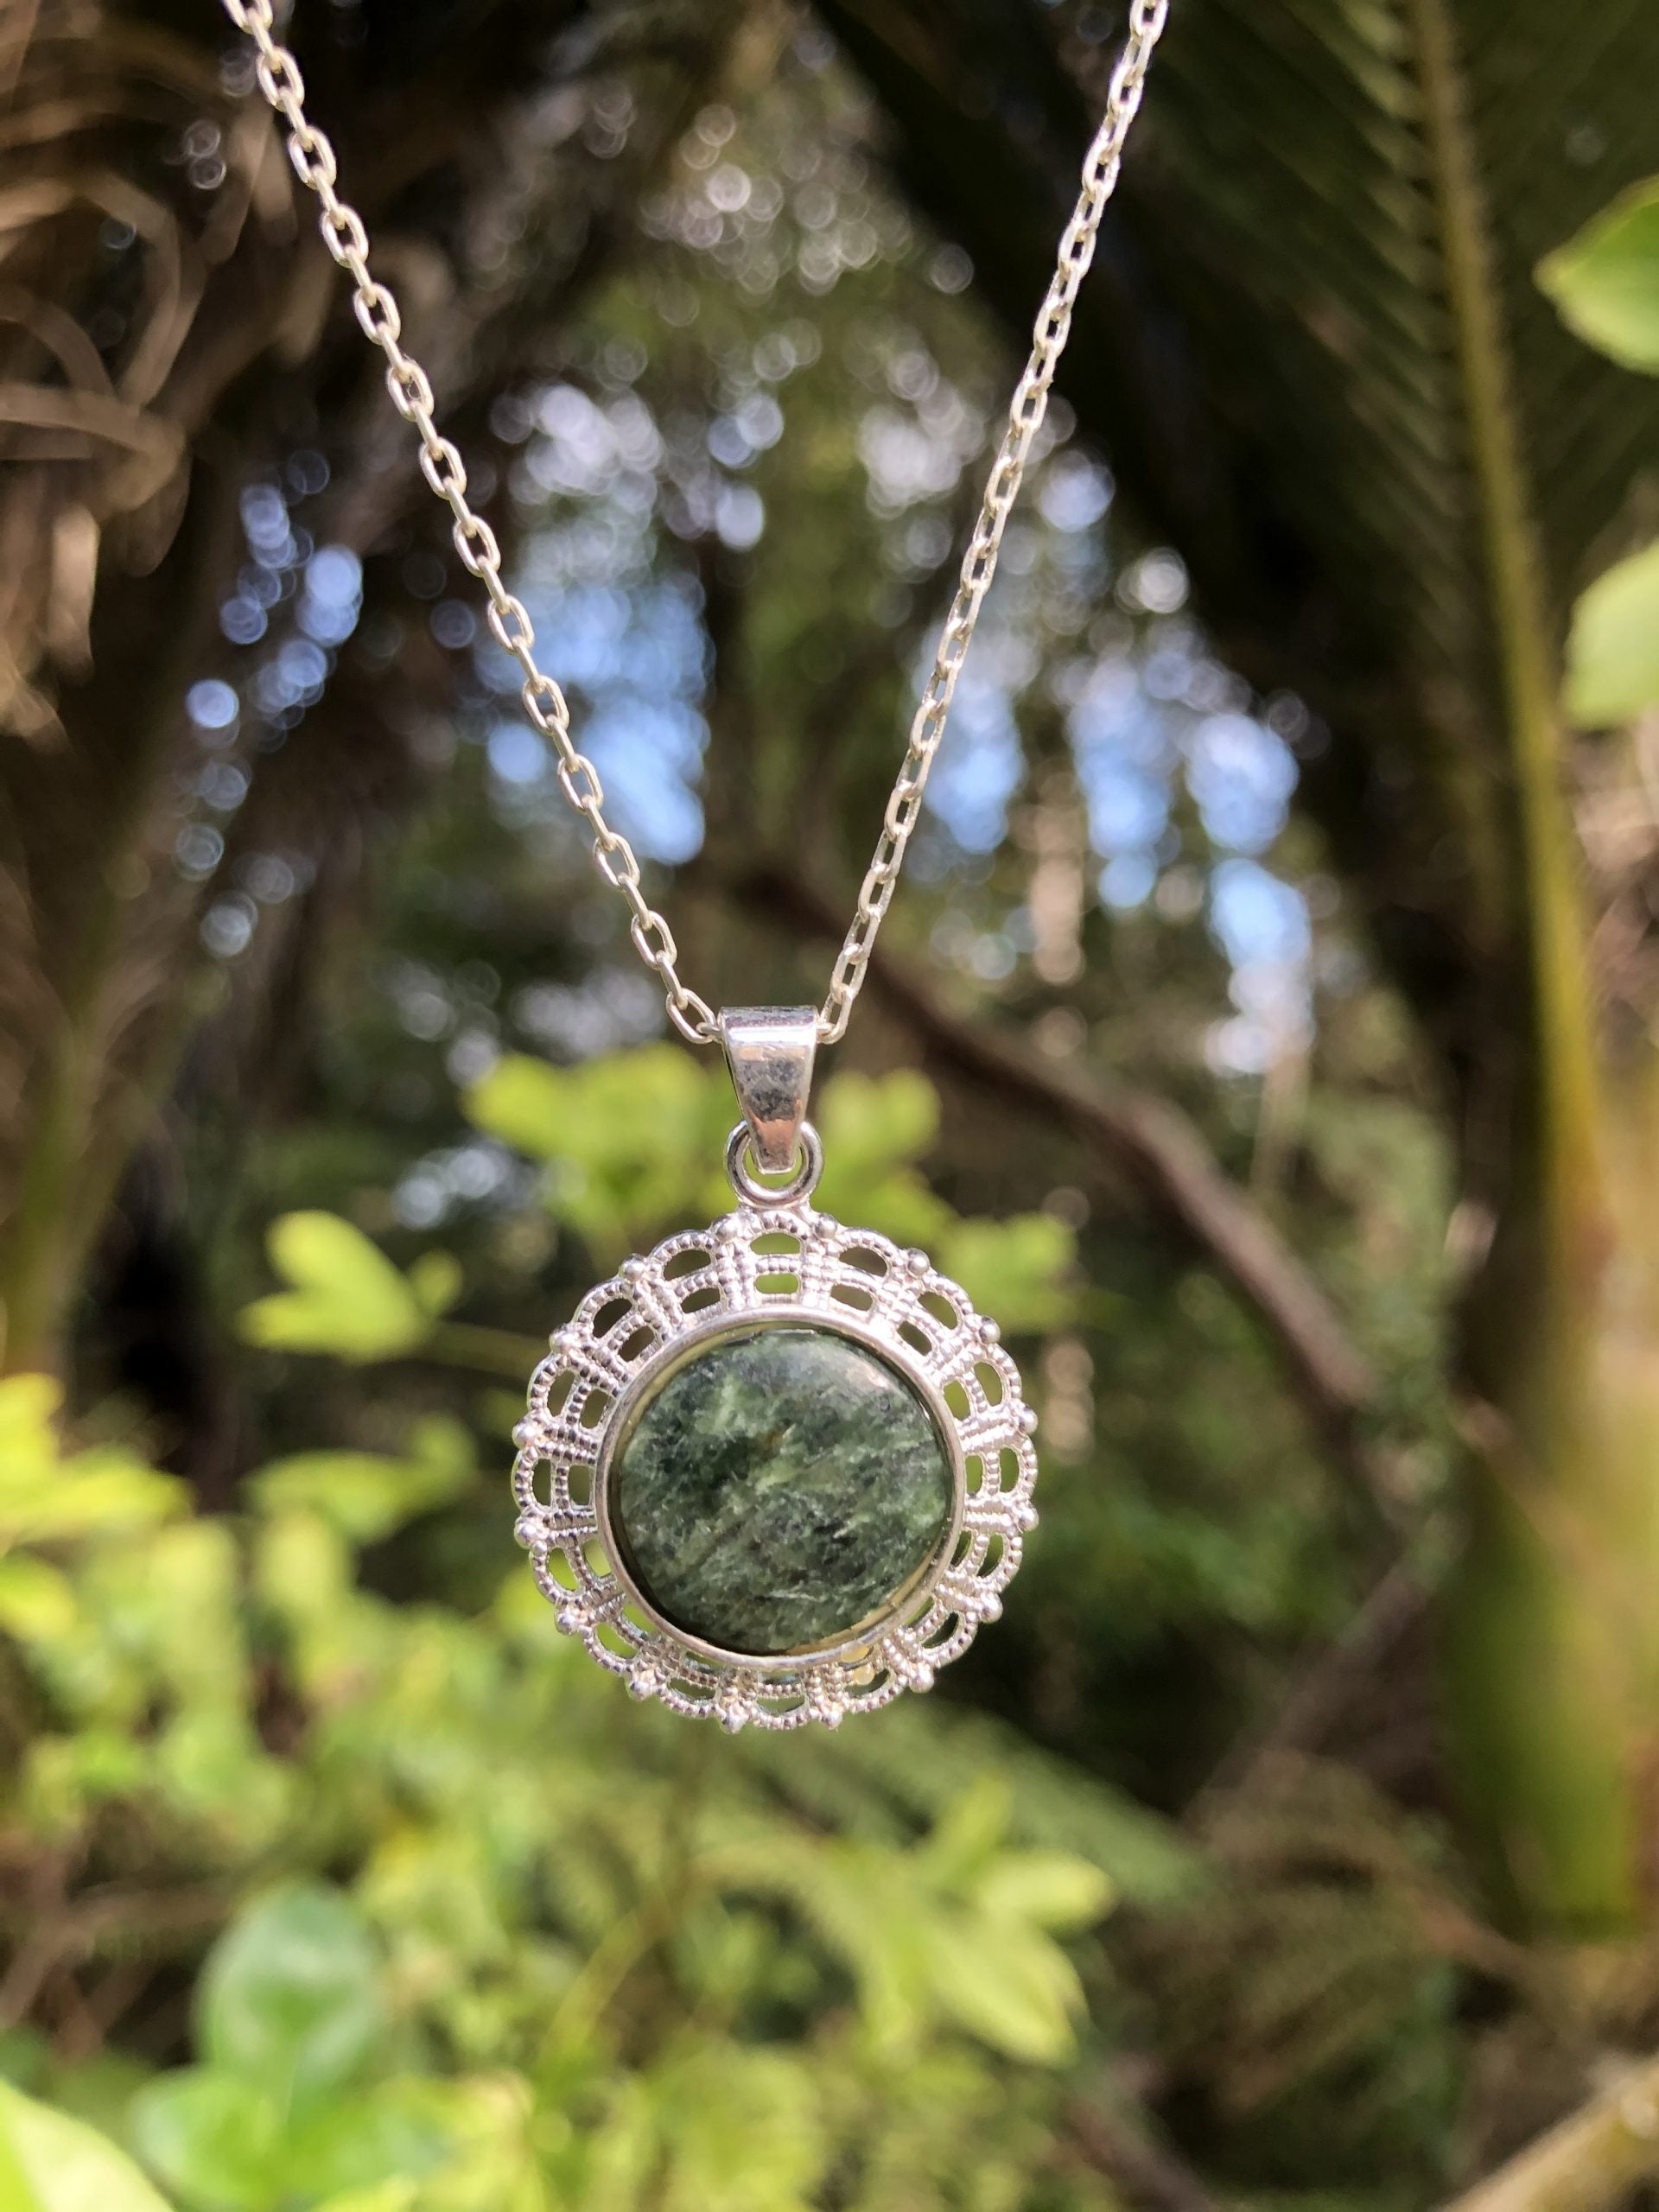 Necklace with New Zealand Pounamu (Greenstone, nephrite jade), dark green with lovely markings, hand polished to a 14mm round cabochon and mounted in a silver plated setting with 19 inch chain.